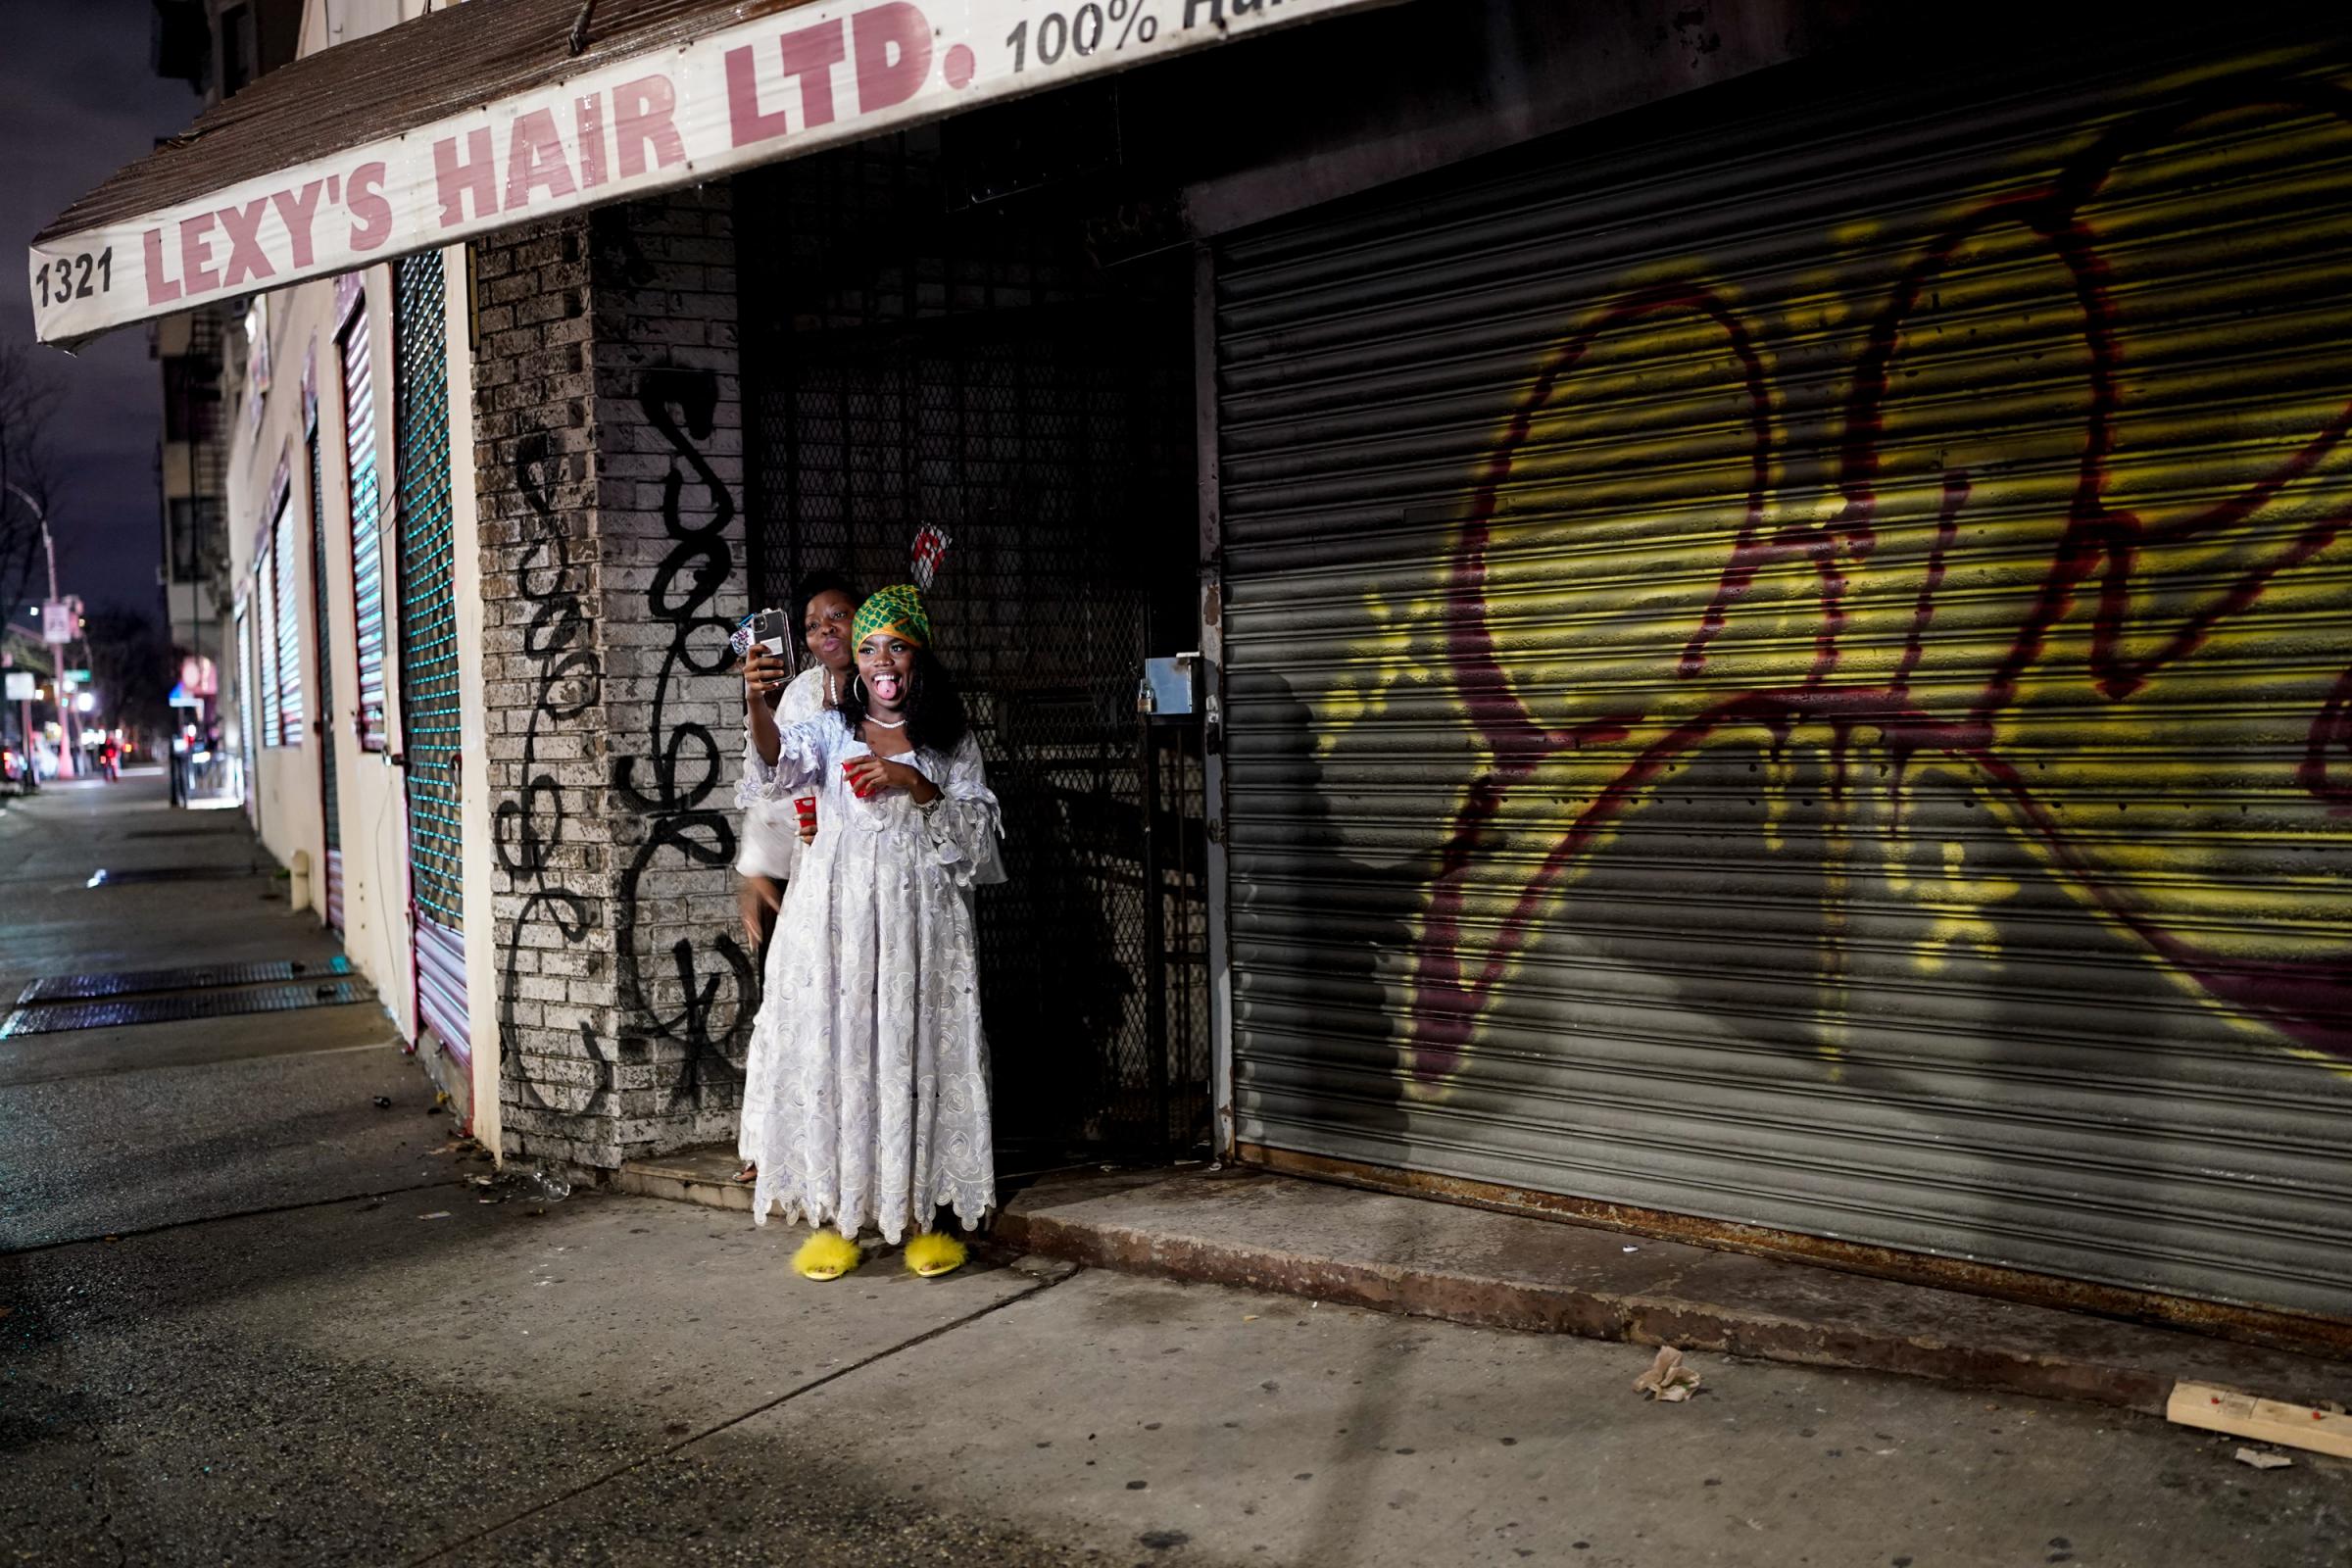 New York Vodou followers battle stereotypes about their religion